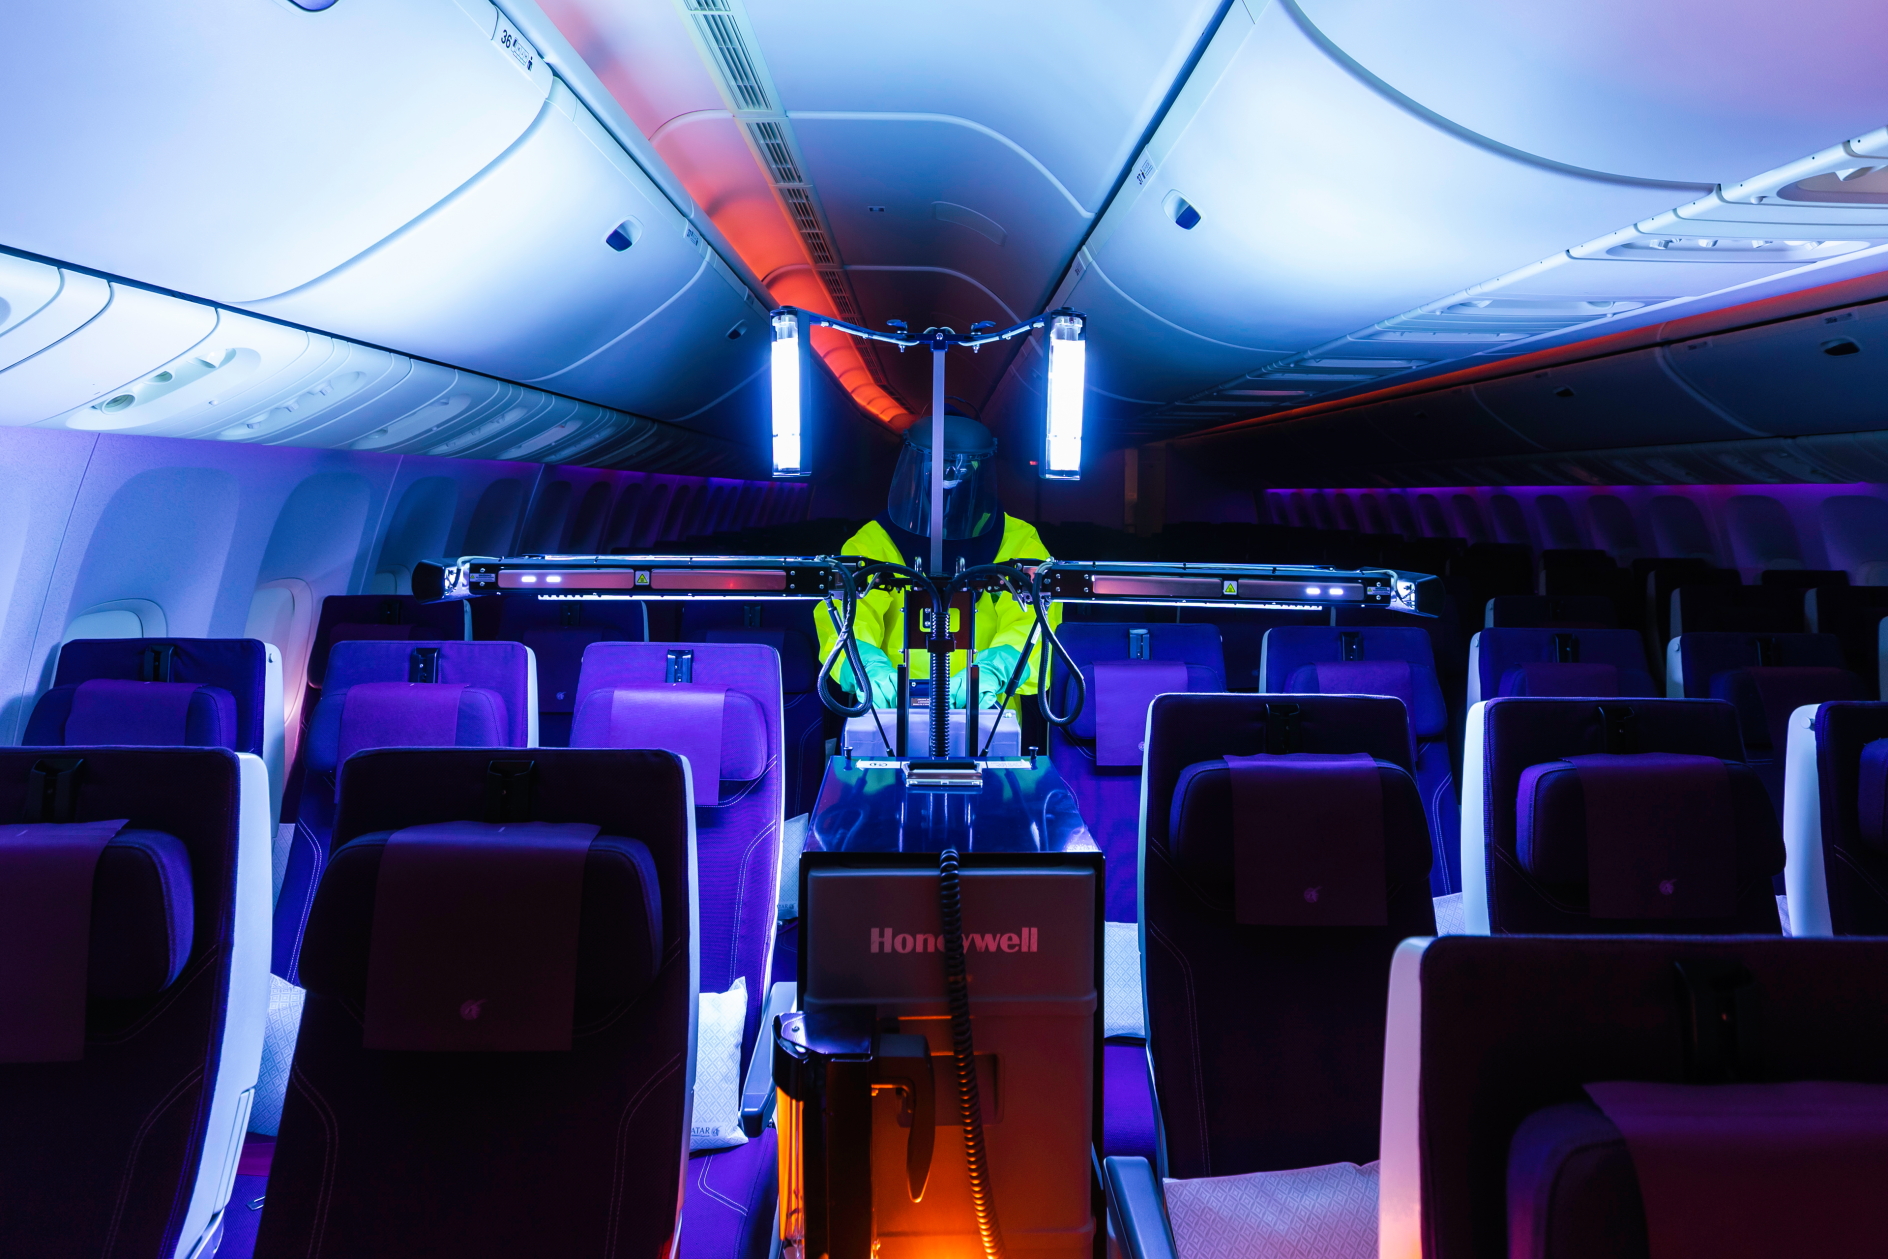 Qatar Airways is the first global carrier to operate version 2.0 of Honeywell’s Ultraviolet (UV) Cabin System. The latest version of the high-tech cabin cleaning system has been introduced to add flexibility, improve reliability, mobility and ease of use compared to its predecessor, with extended UV wings that treat both narrow and wide areas on board, reducing the overall disinfection time. Click to enlarge.